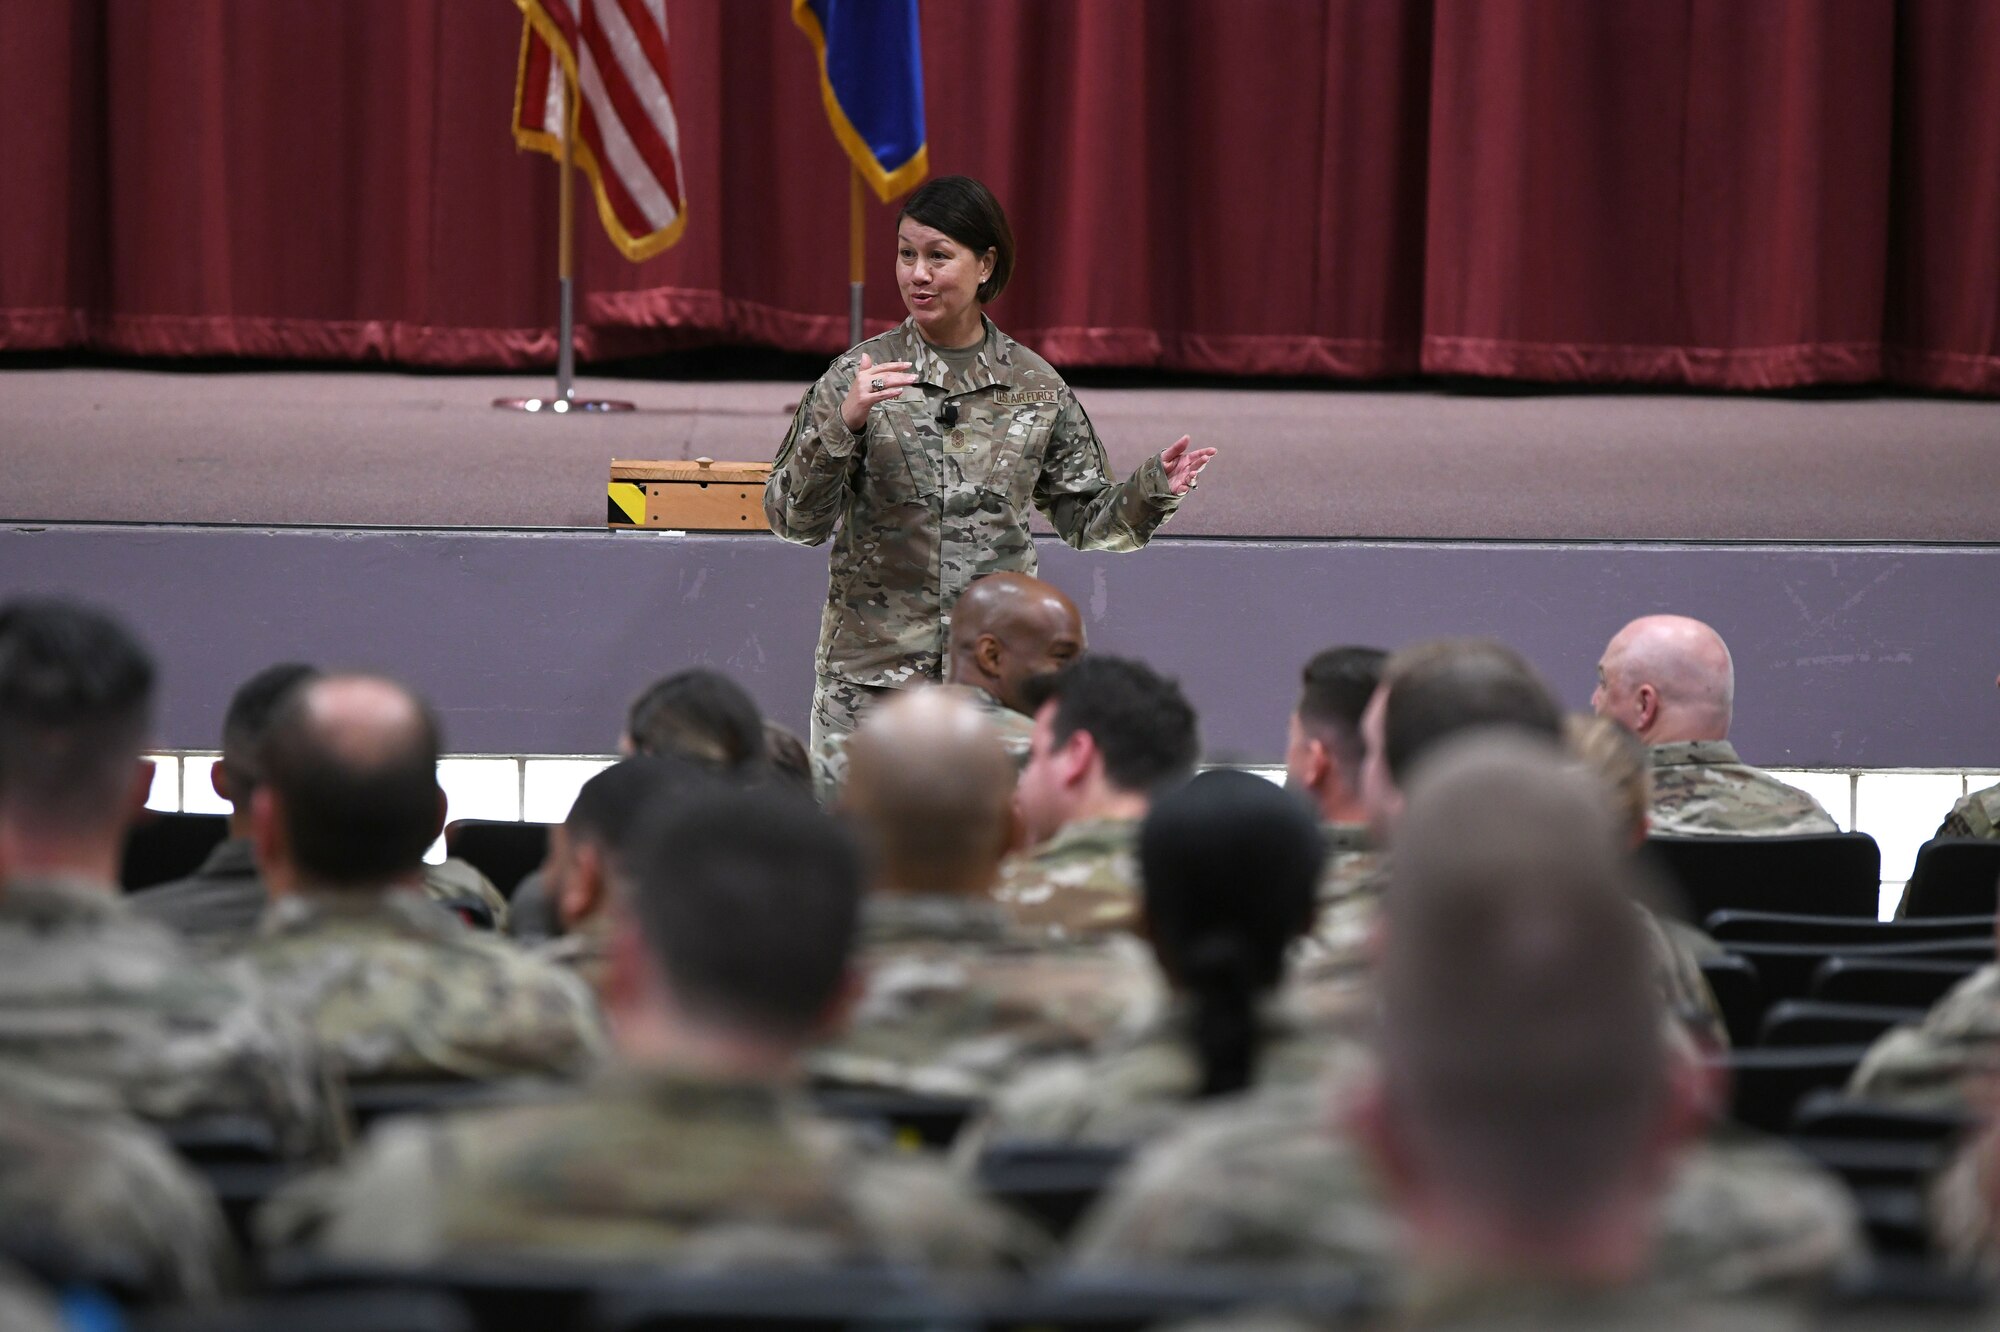 Airman speaking to an auditorium of people.